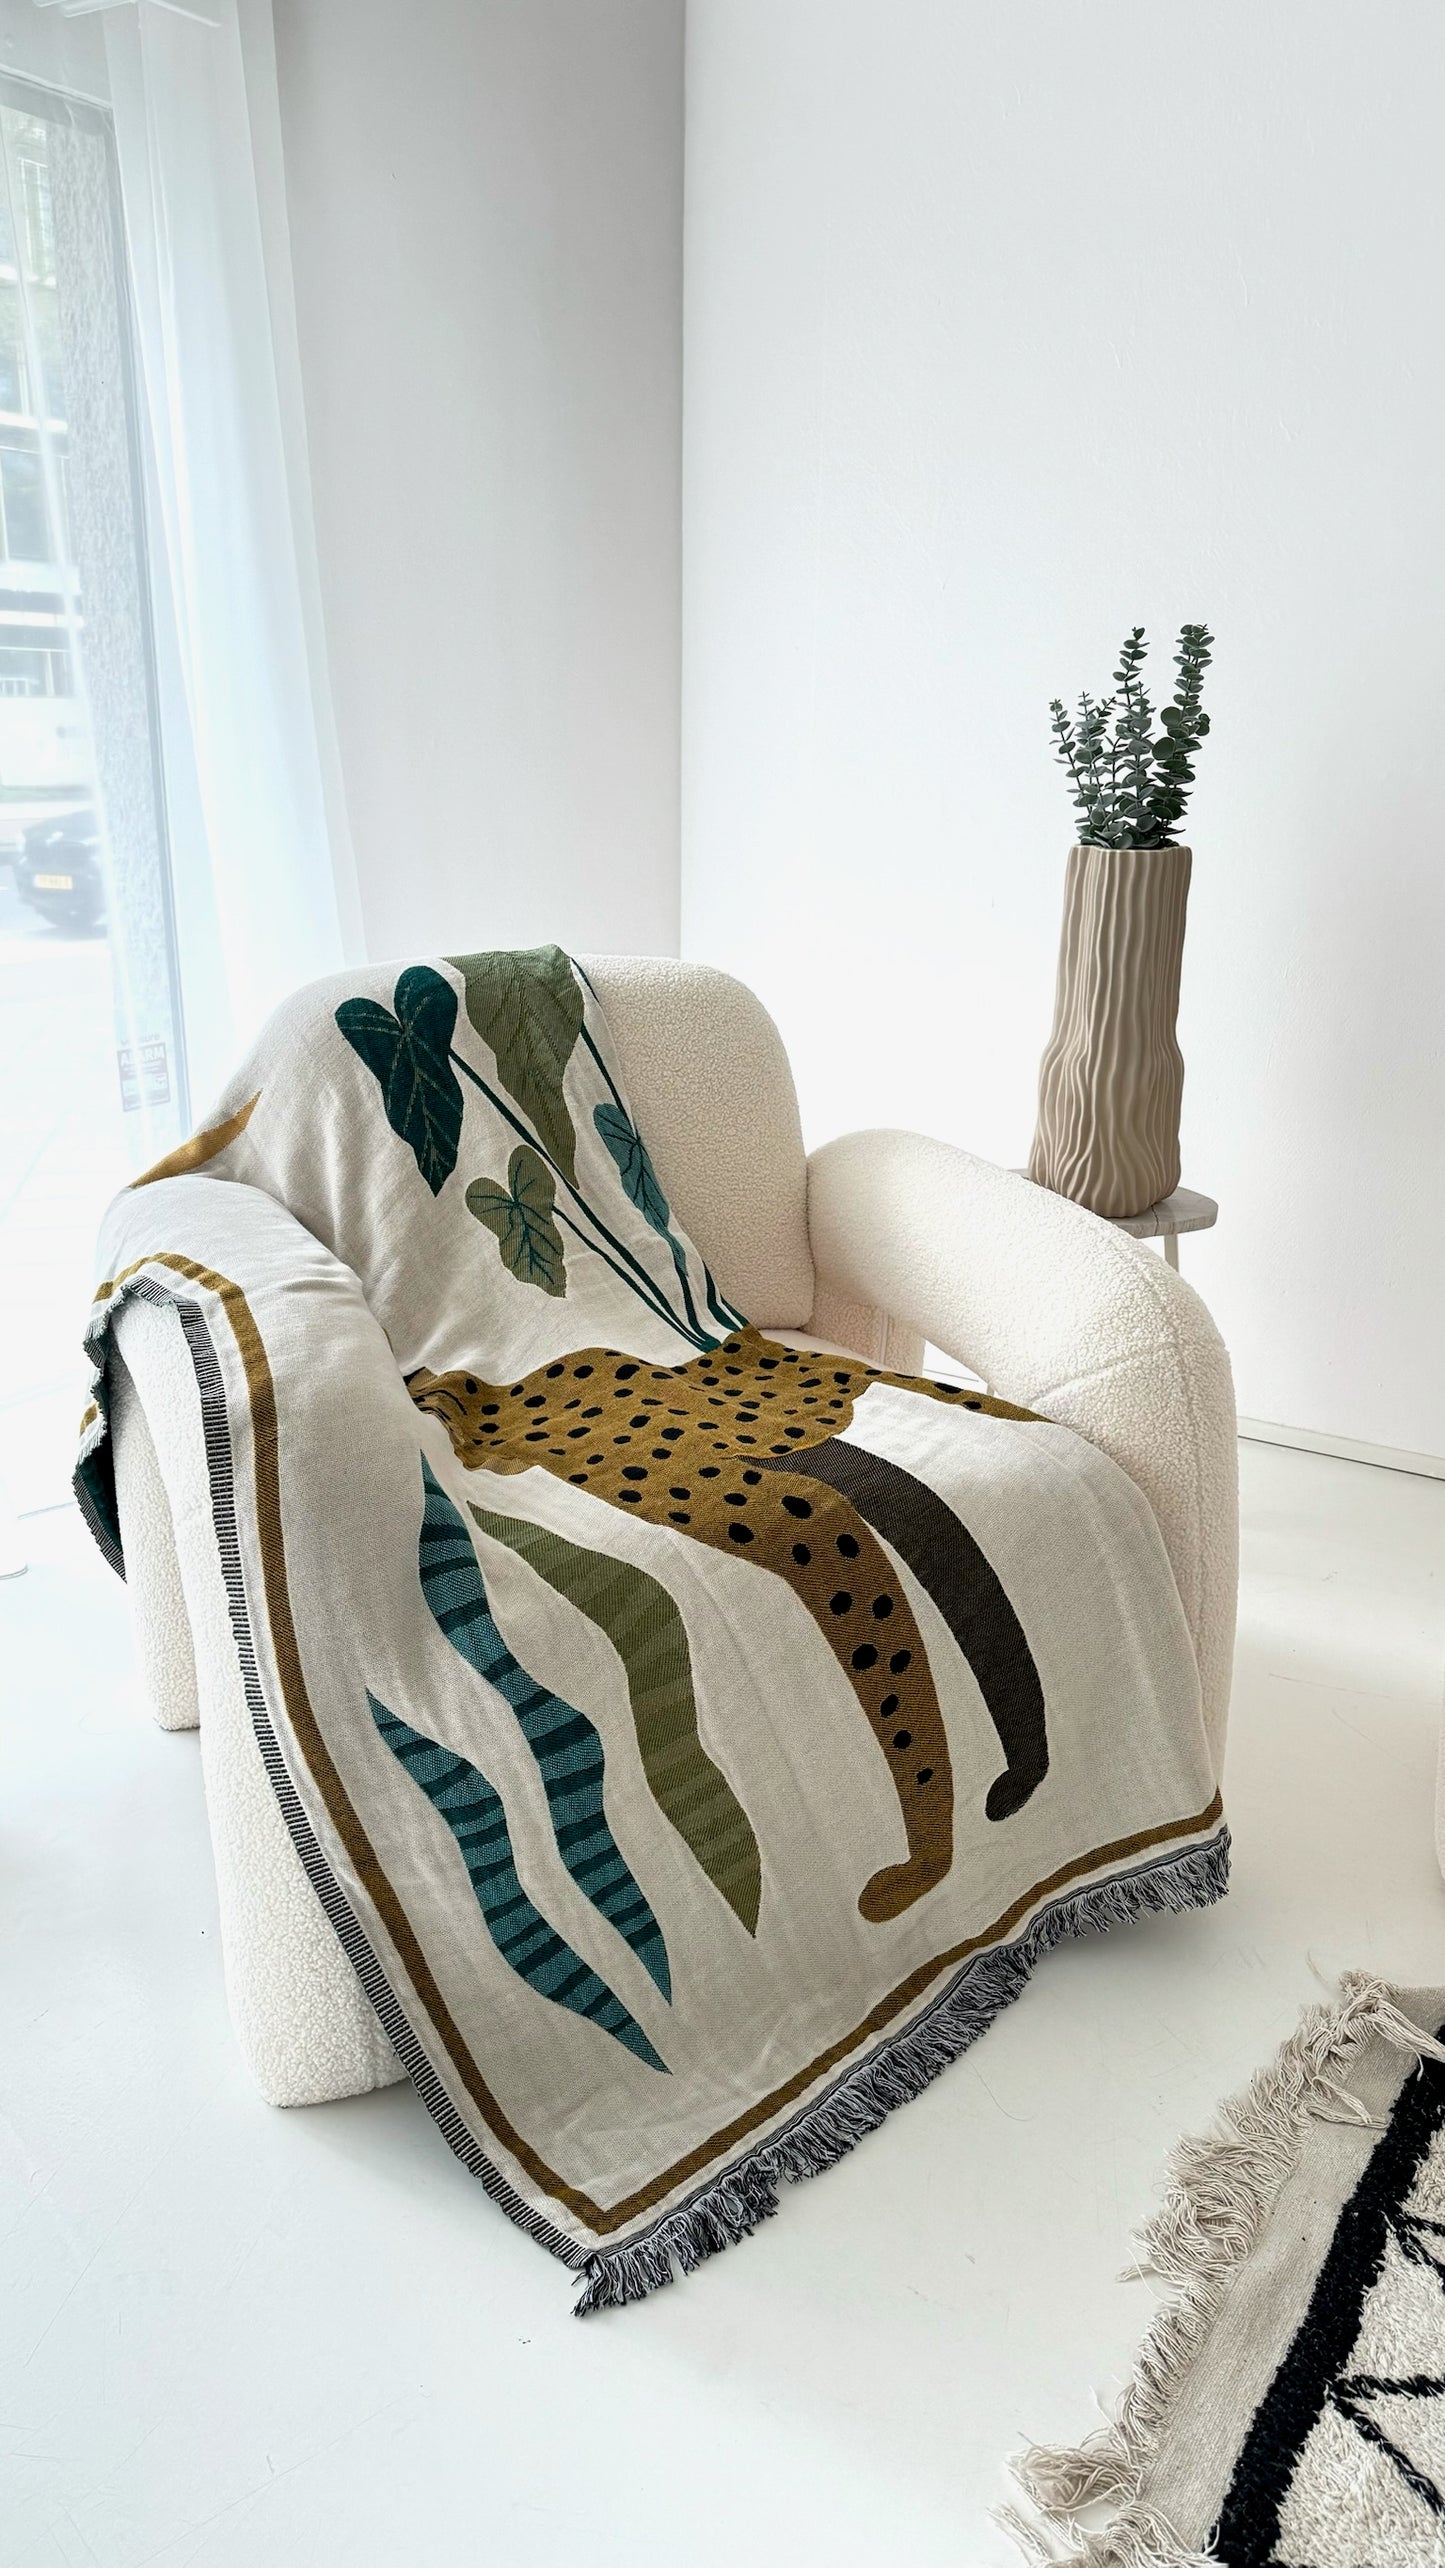 Sahara Couch Throw - 100% cotton, jacquard couch throw with cheetah in nature pattern tones, different on each side